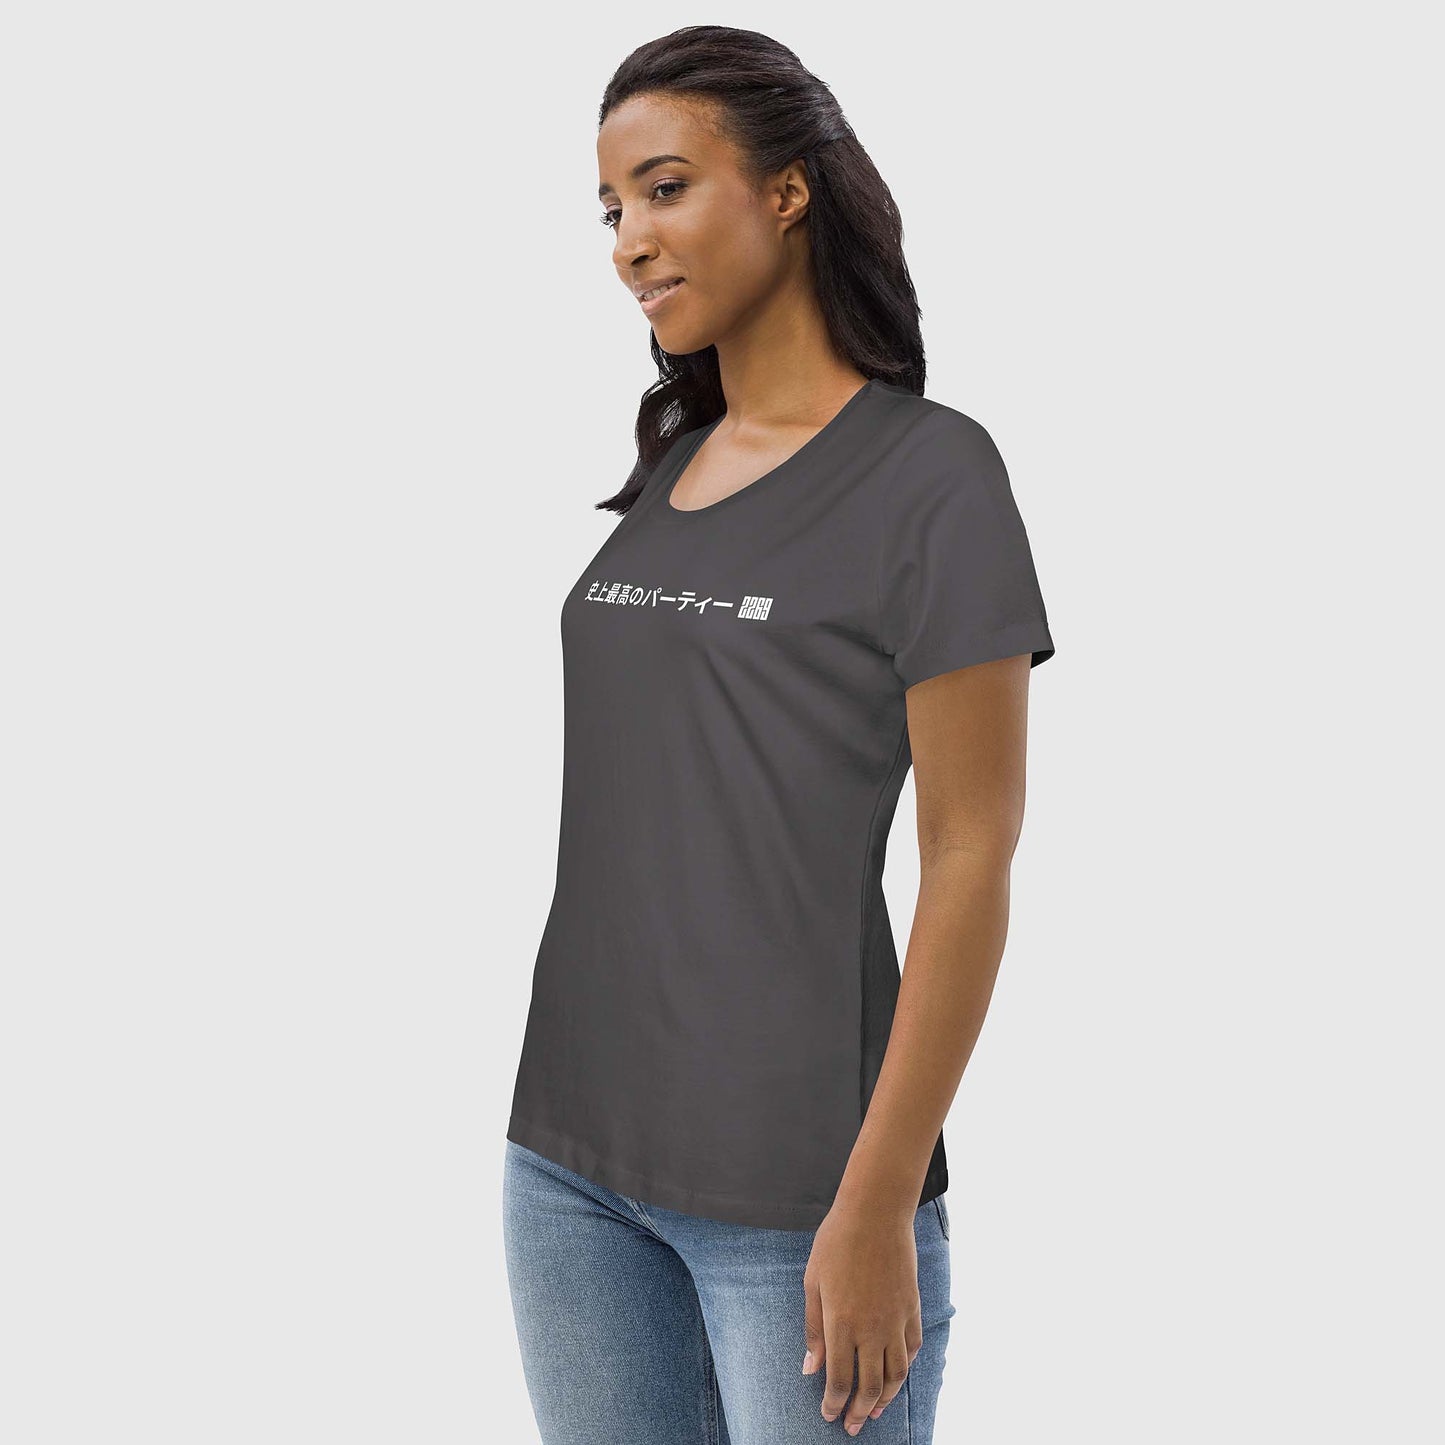 Women's anthracite fitted organic cotton t-shirt with Japanese 2269 party message